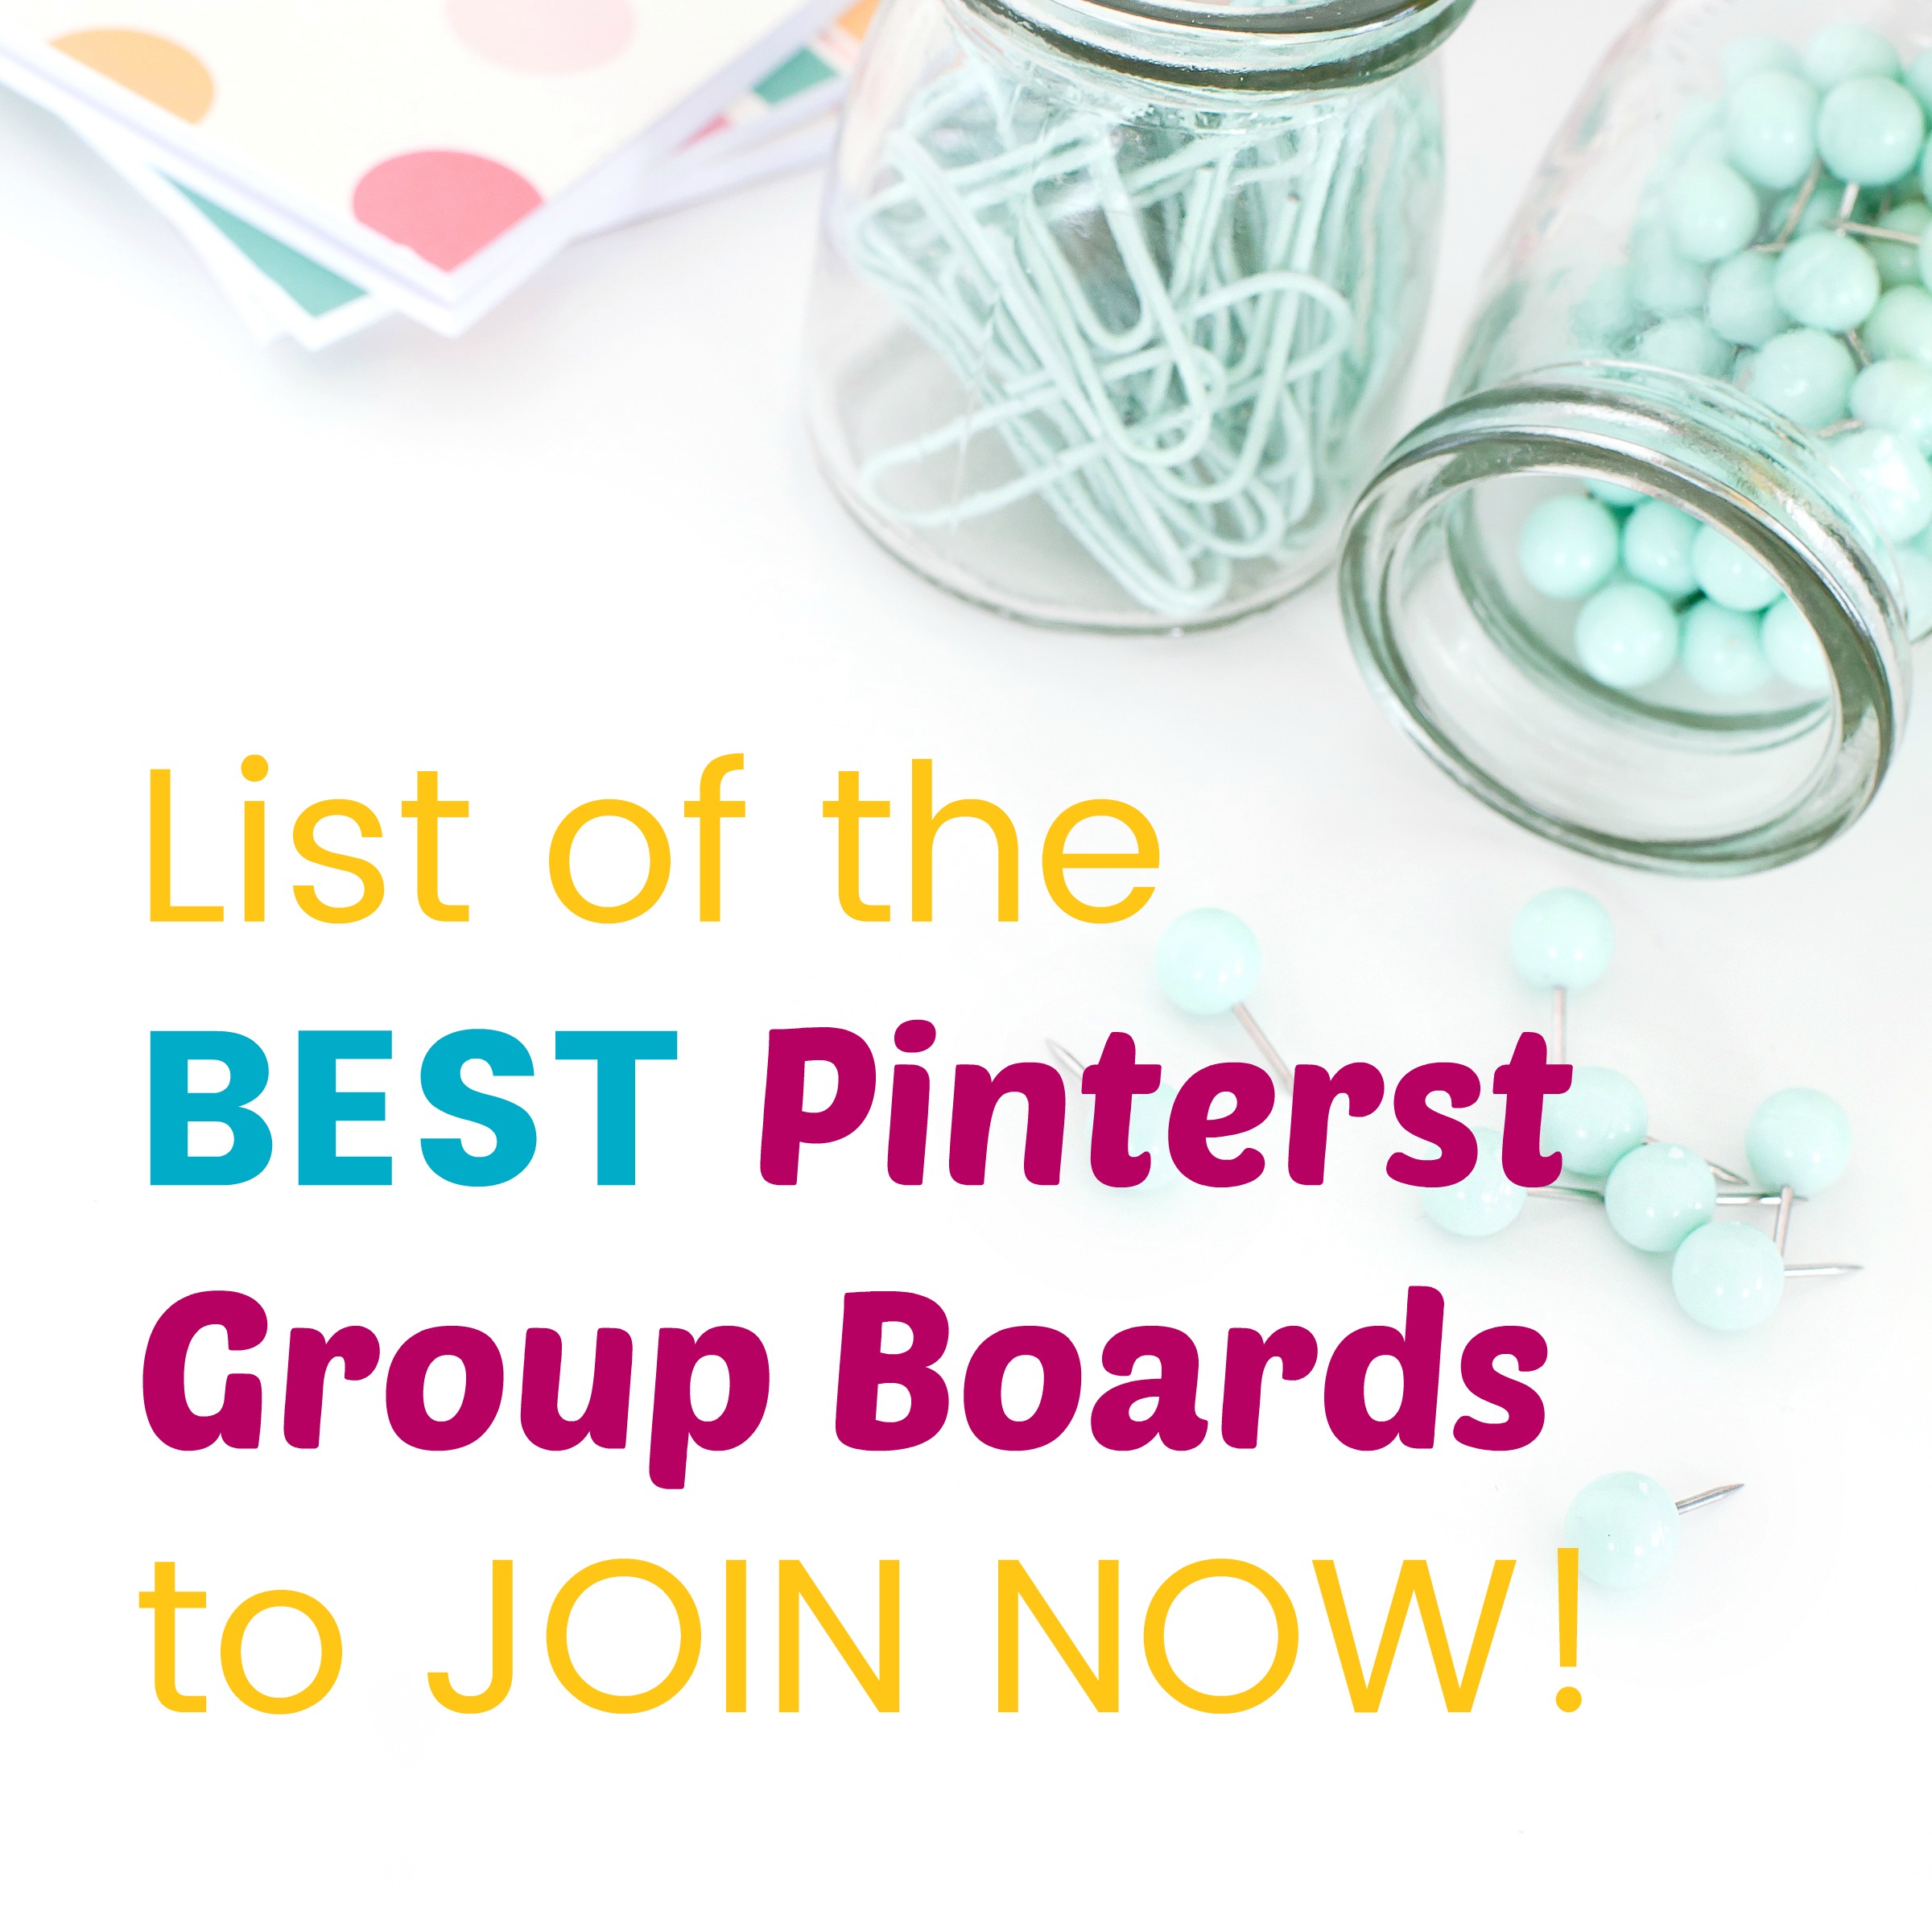 How to Join Pinterest Group Boards